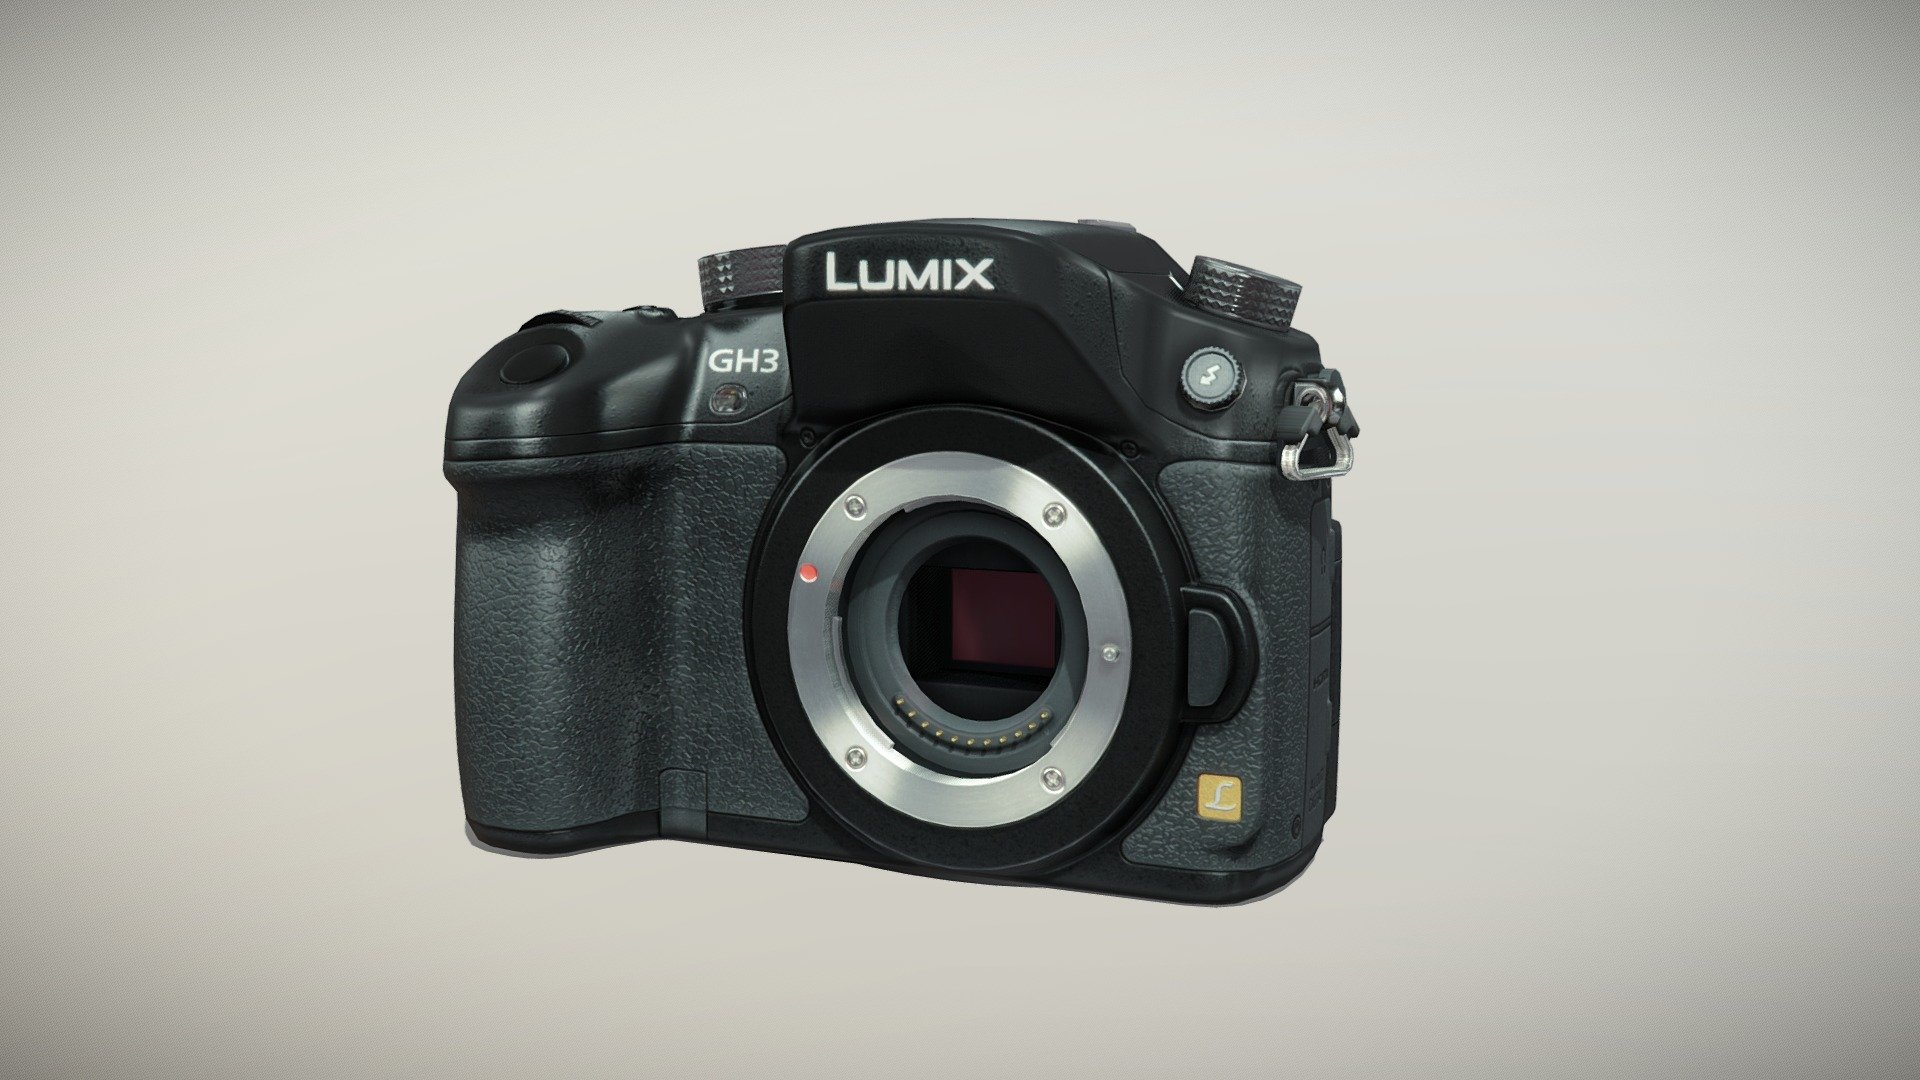 •   Let me present to you high-quality low-poly 3D model Panasonic Lumix DMC-GH3 Black. Modeling was made with ortho-photos of real camera that is why all details of design are recreated most authentically.

•    This model consists of a few meshes, it is low-polygonal and it has only one material.

•   The total of the main textures is 5. Resolution of all textures is 4096 pixels square aspect ratio in .png format. Also there is original texture file .PSD format in separate archive.

•   Polygon count of the model is – 5033.

•   The model has correct dimensions in real-world scale. All parts grouped and named correctly.

•   To use the model in other 3D programs there are scenes saved in formats .fbx, .obj, .DAE, .max (2010 version).

Note: If you see some artifacts on the textures, it means compression works in the Viewer. We recommend setting HD quality for textures. But anyway, original textures have no artifacts 3d model